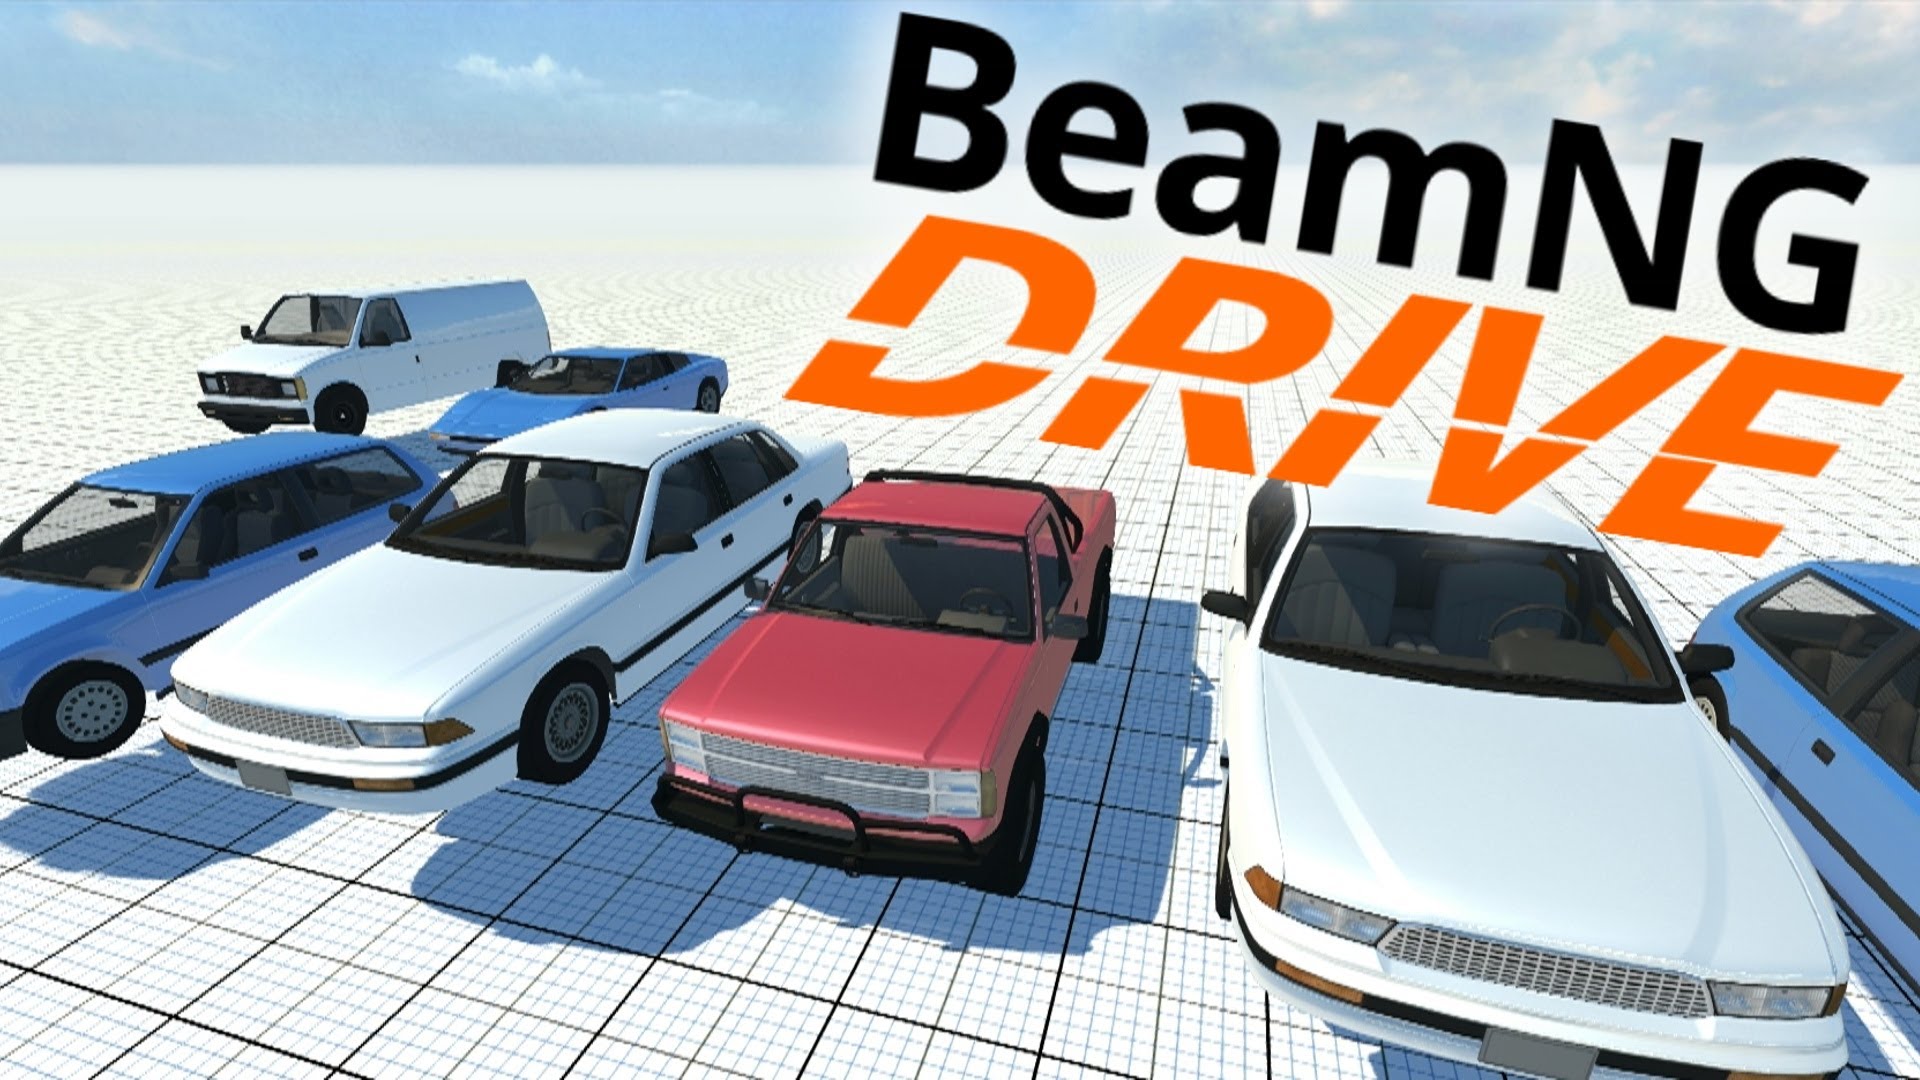 beamng drive free play unblocked